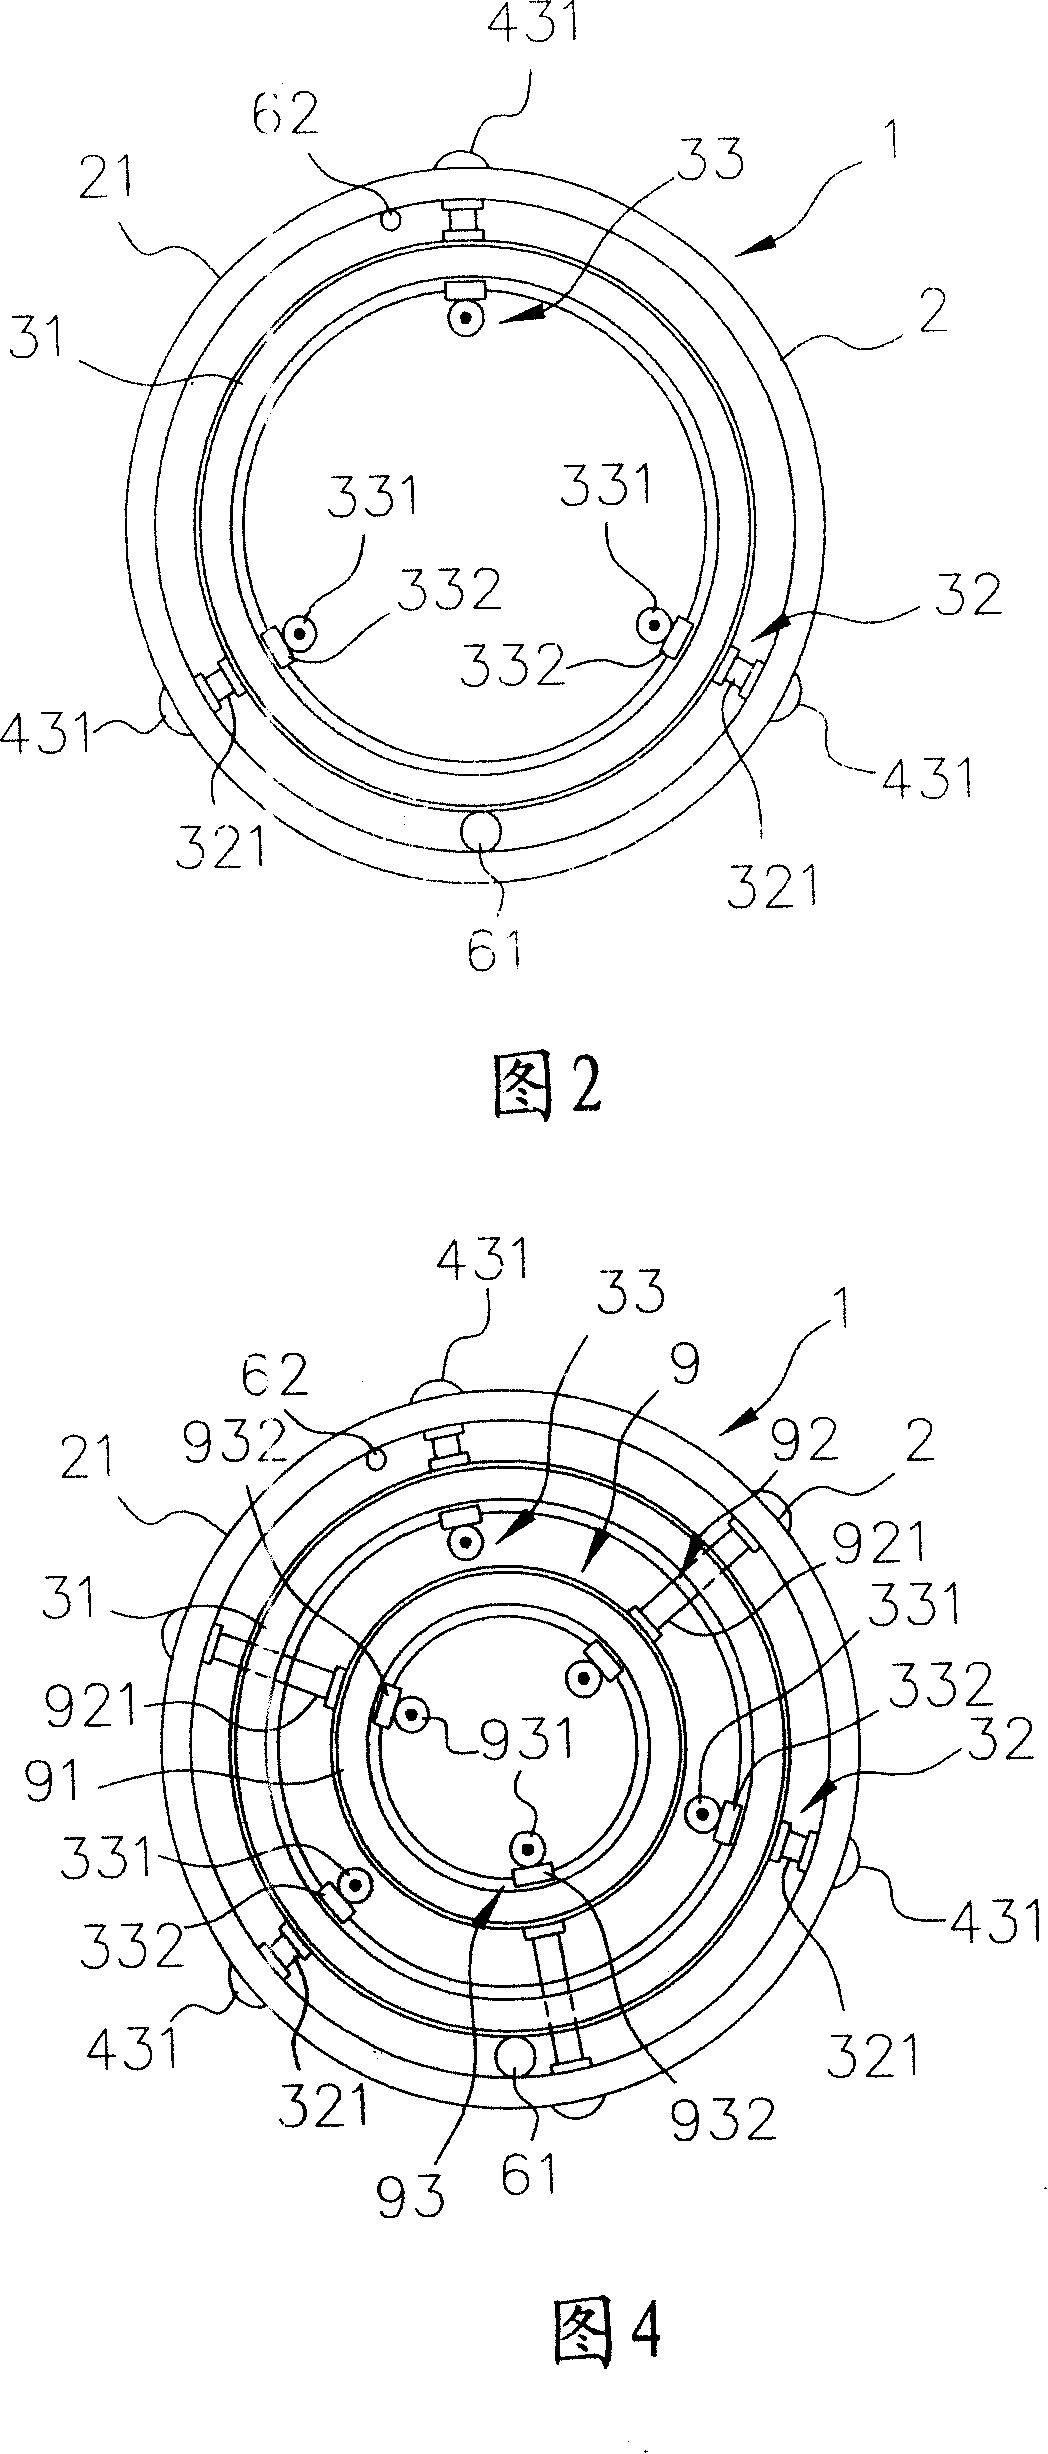 Non-contact type destruction propeller device for cementing domain